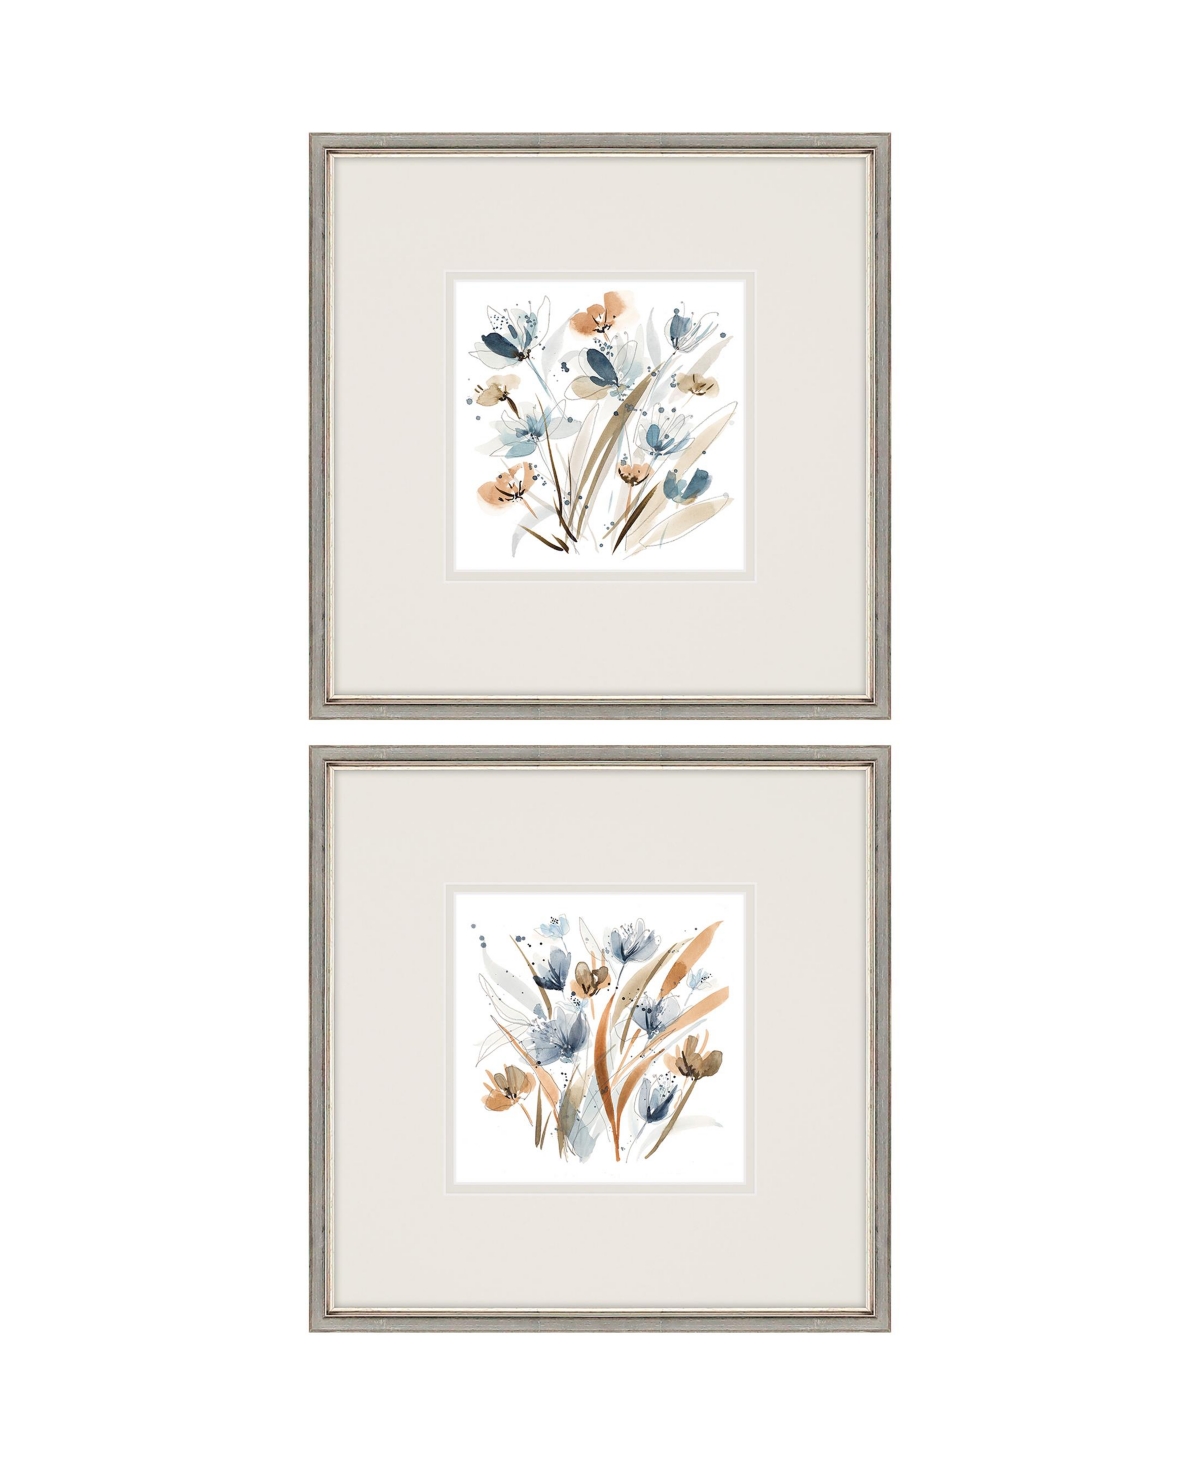 Paragon Picture Gallery Coastal Blooms Framed Art, Set Of 2 In Blue